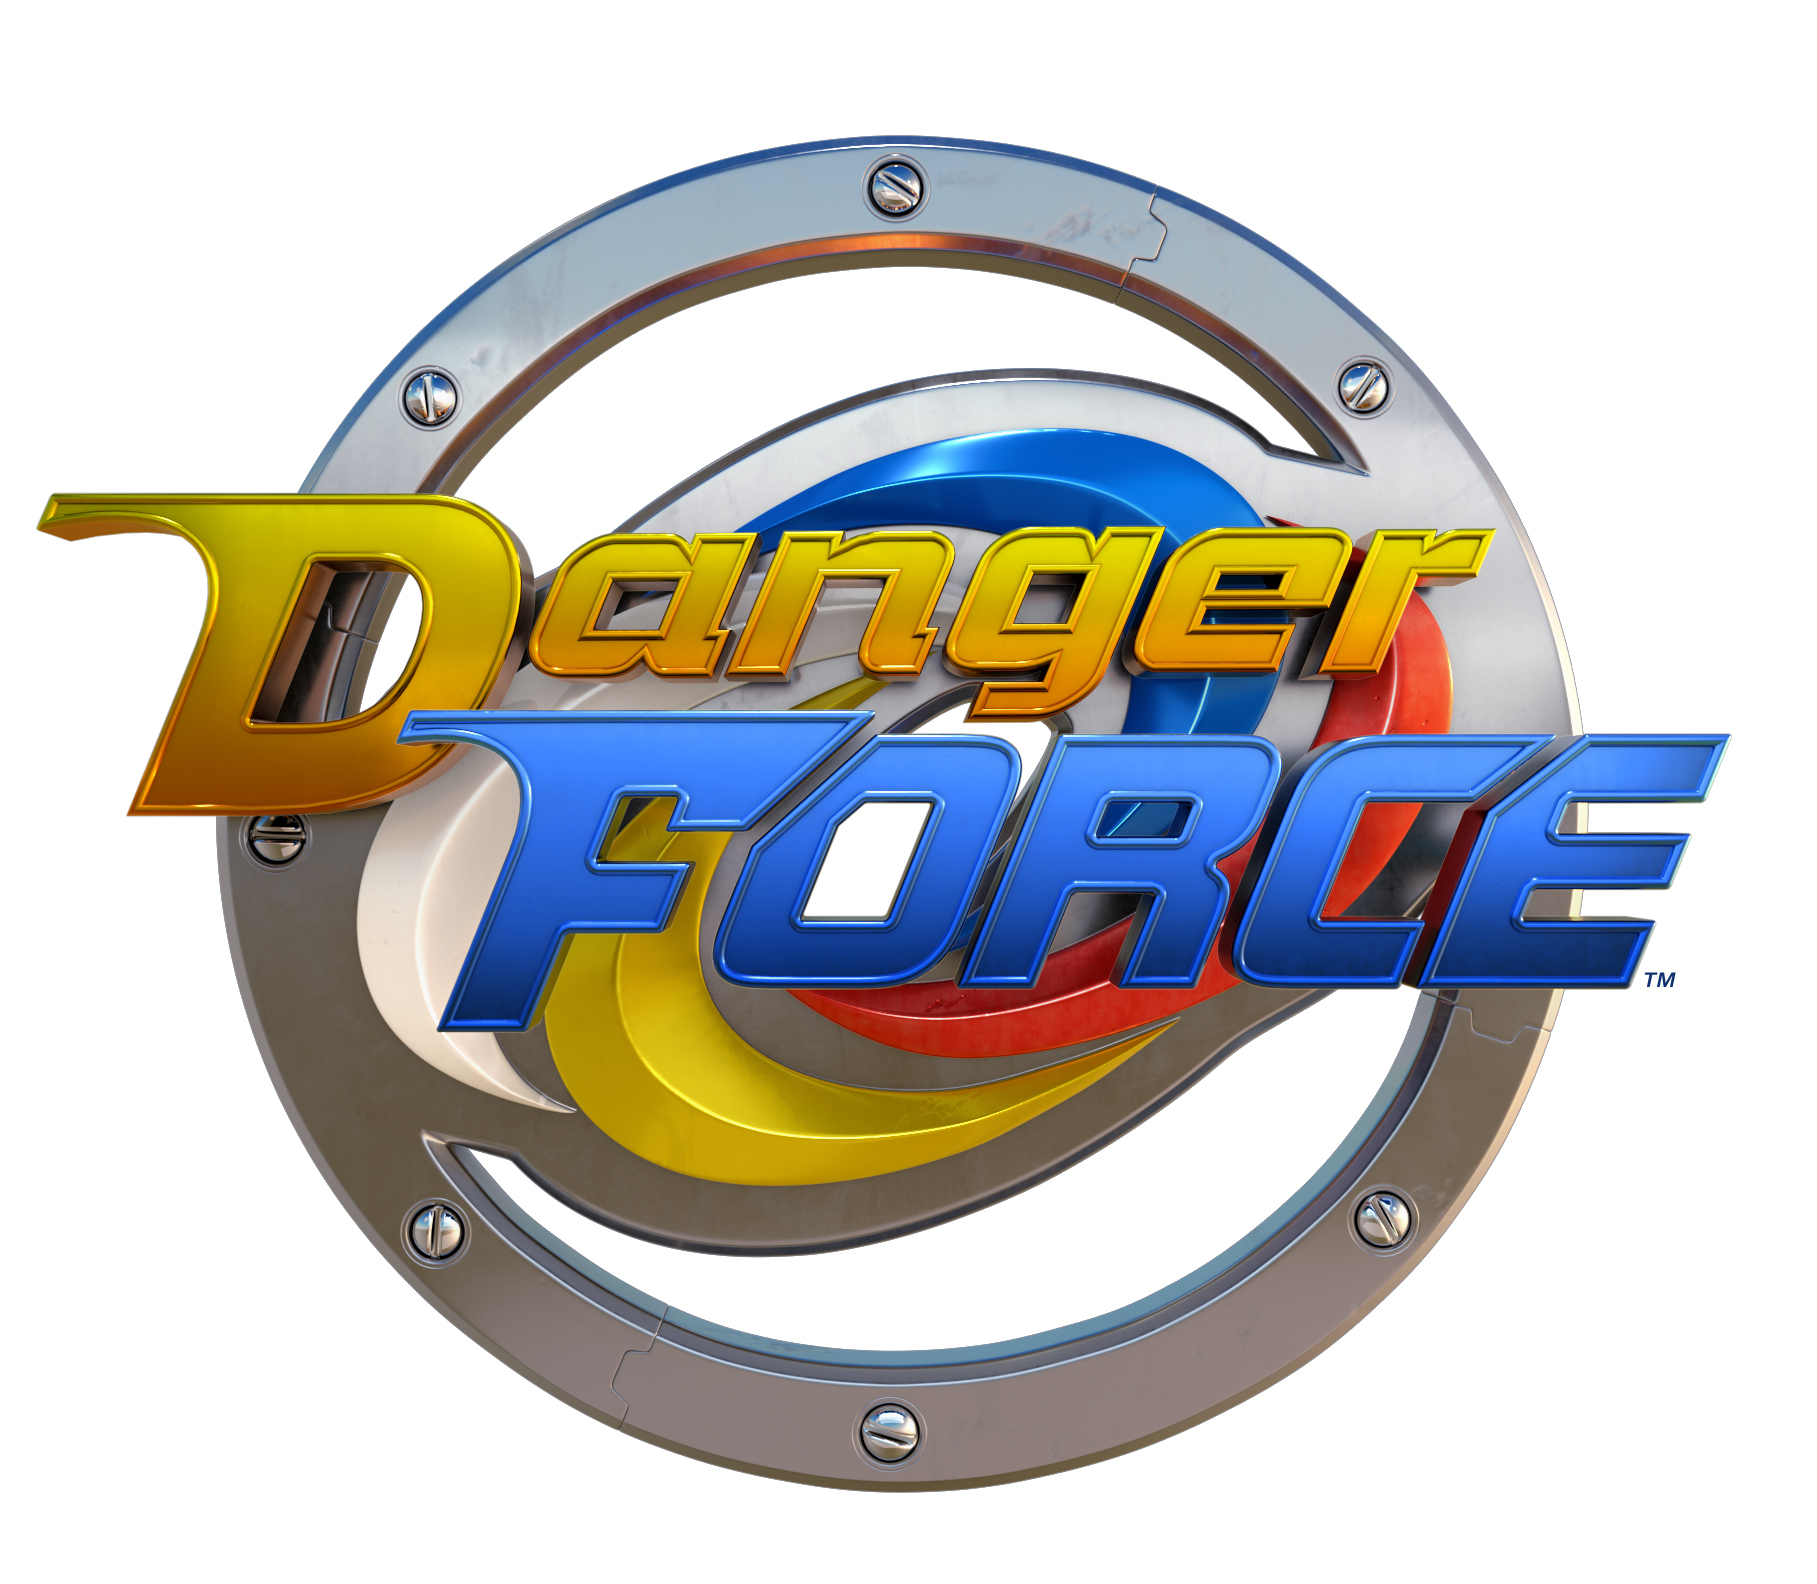 Henry Danger Force - the #DangerForce squad is fighting crime and